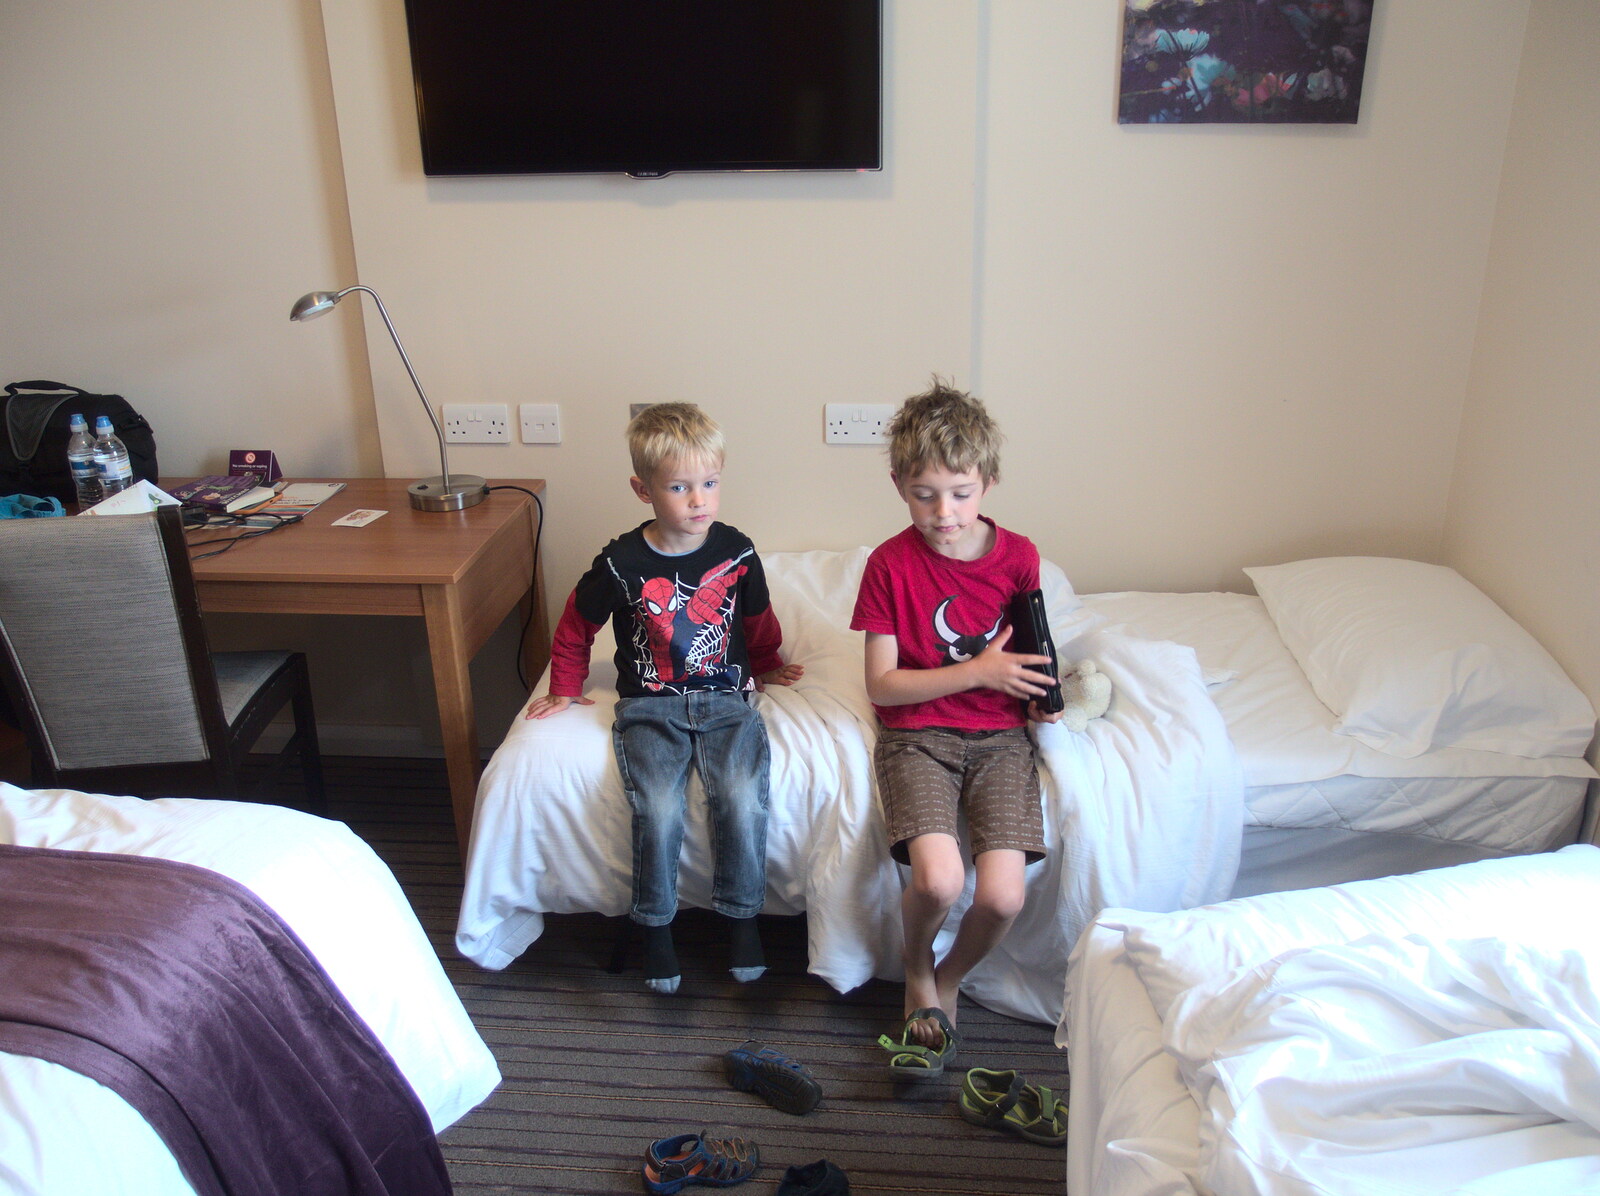 The boys in the room from Camping With Sean, Ashburton, Devon - 8th August 2016